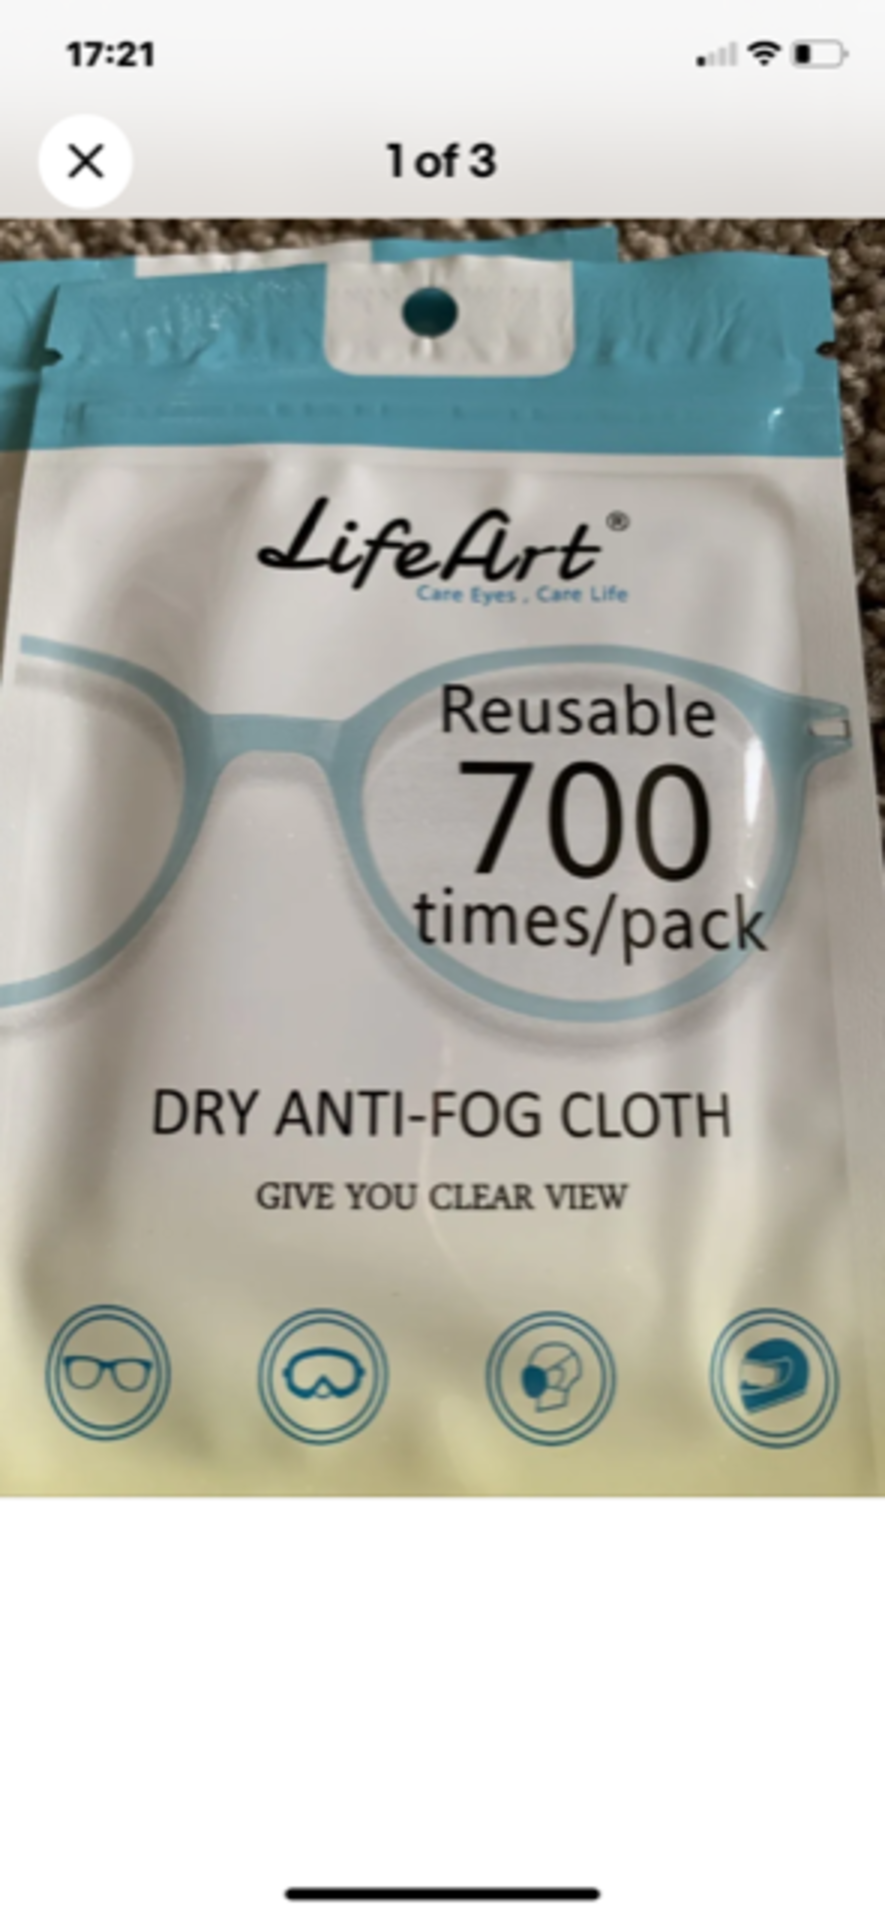 Job Lot of 390 Reusable Spectacle s/Glasses Anti Fog Cloths In Packs of 30 - Image 3 of 3